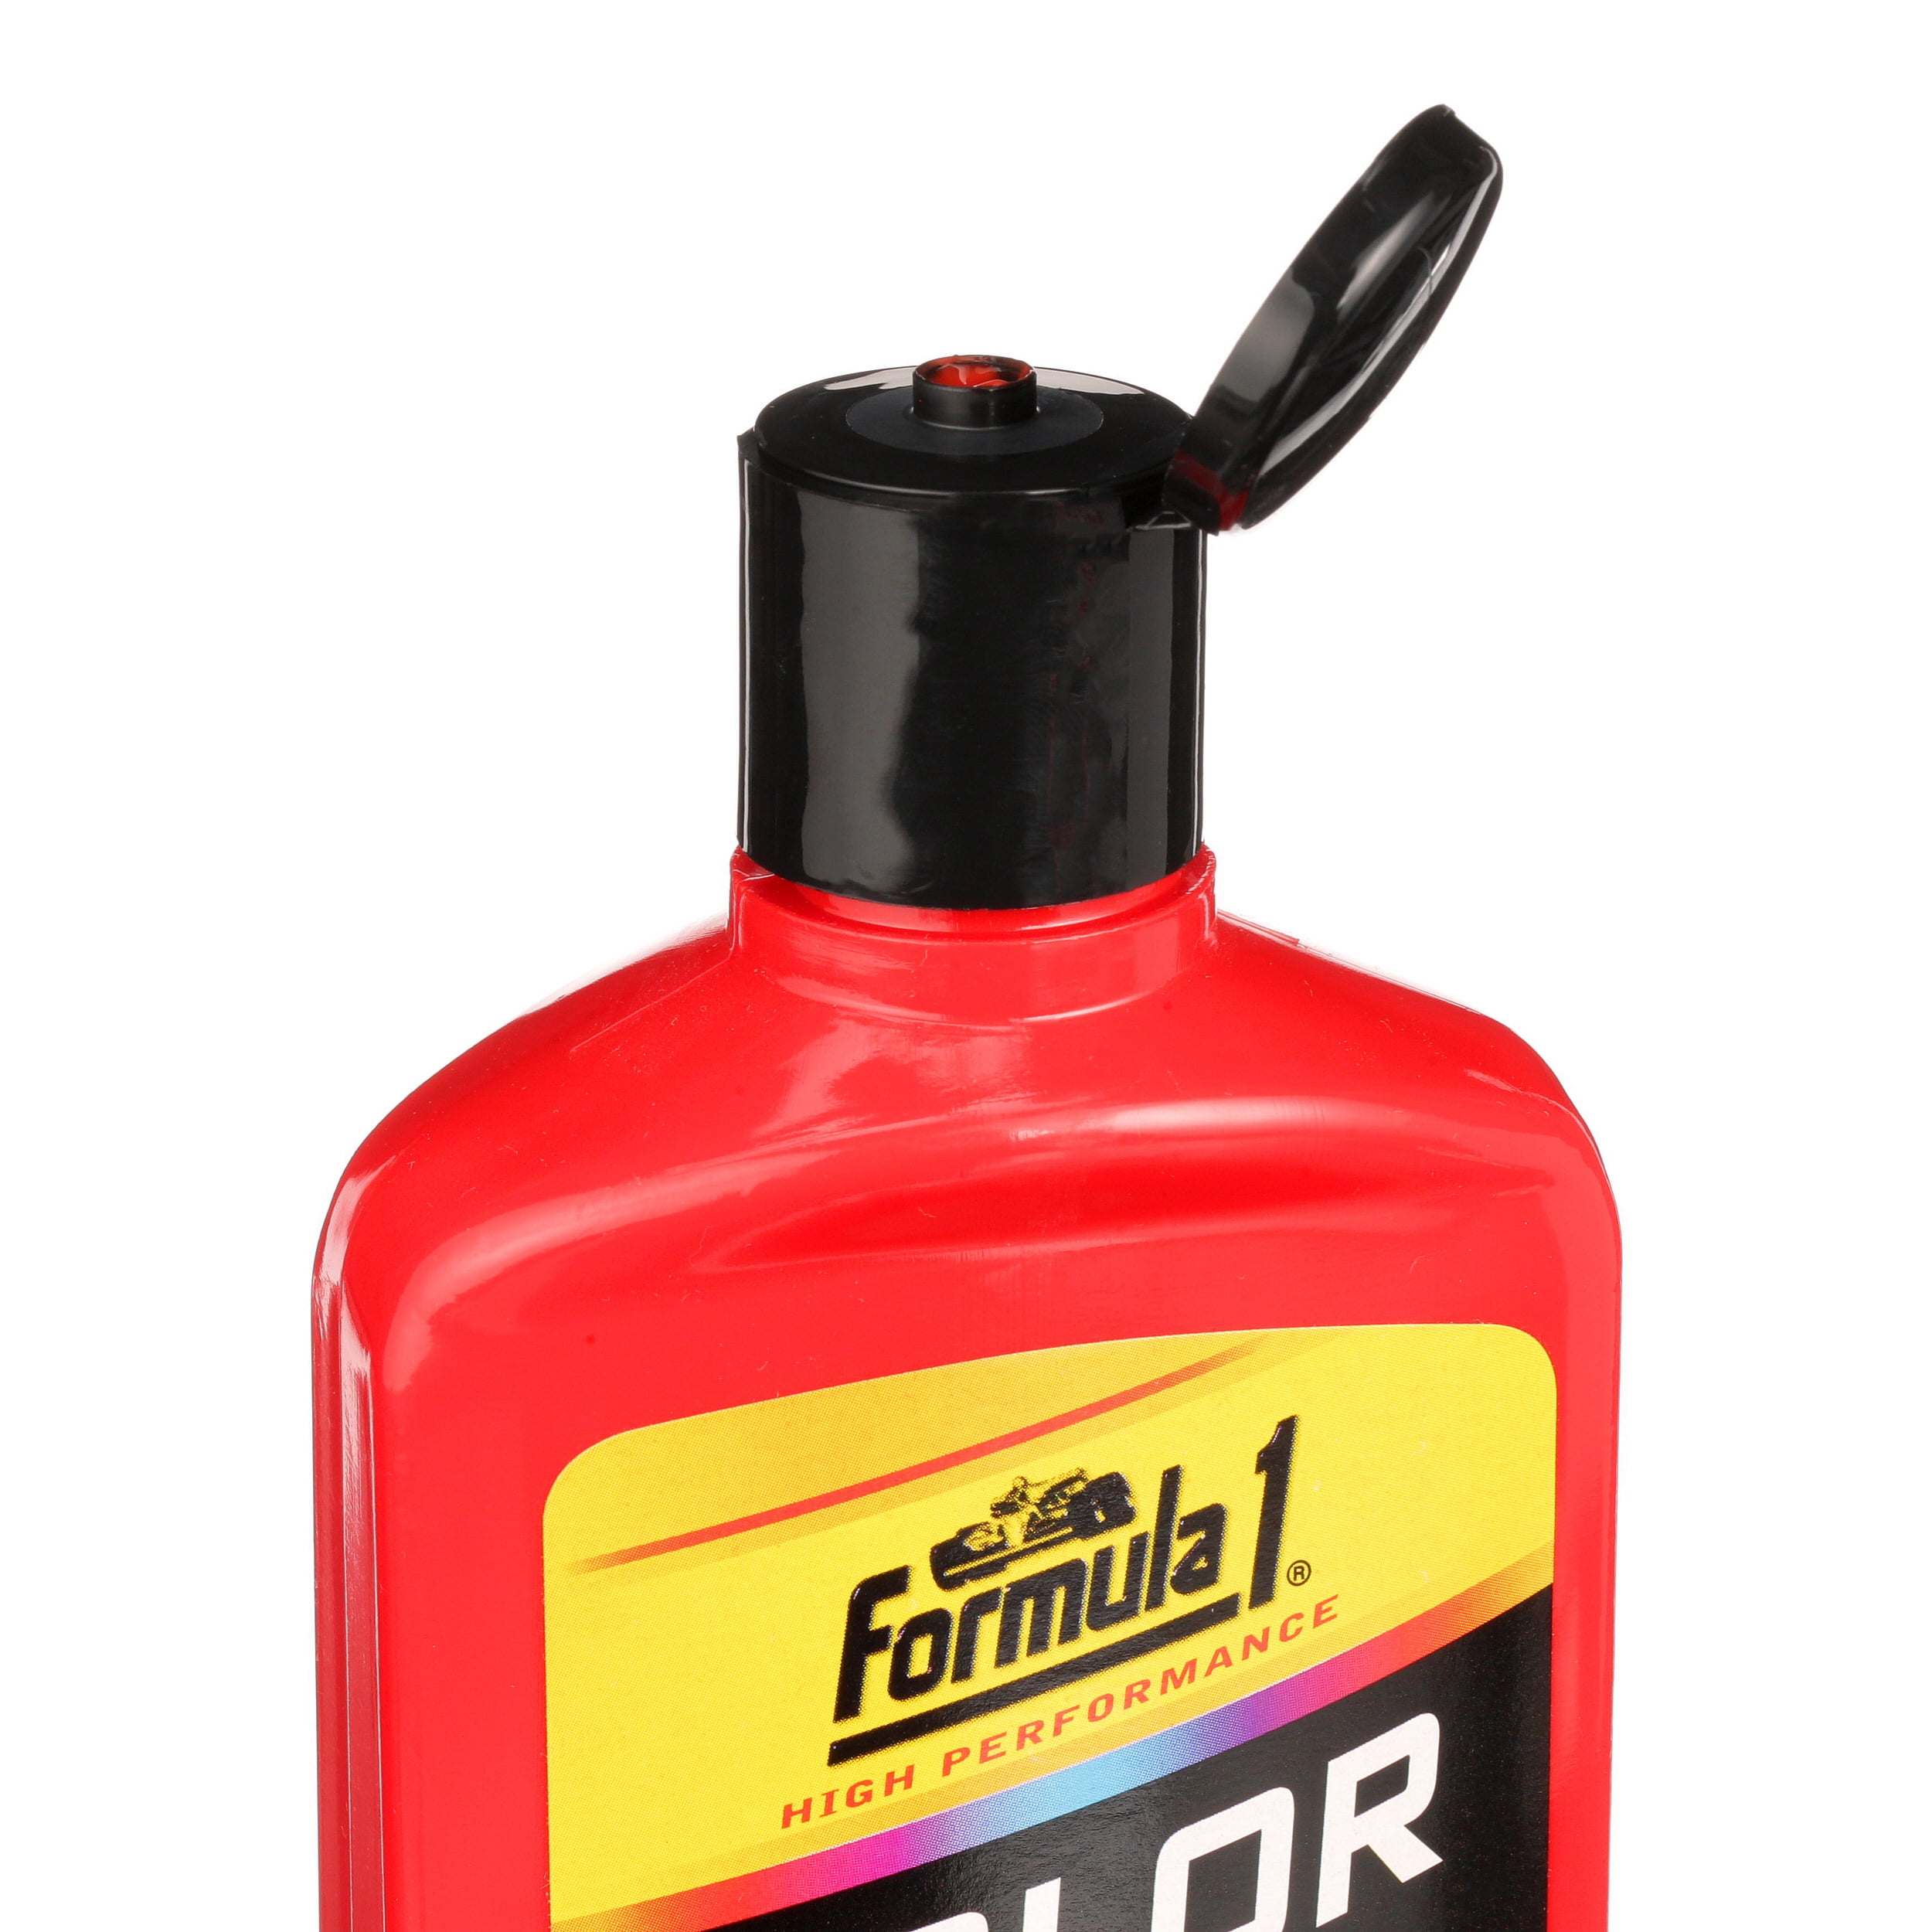 Formula 1 Red Color Car Wax to Erase Car Scratches & Swirls, Restore &  Protect Red Colored Cars, UV-Stable Pigment Car Detailing Wax w/Polishing